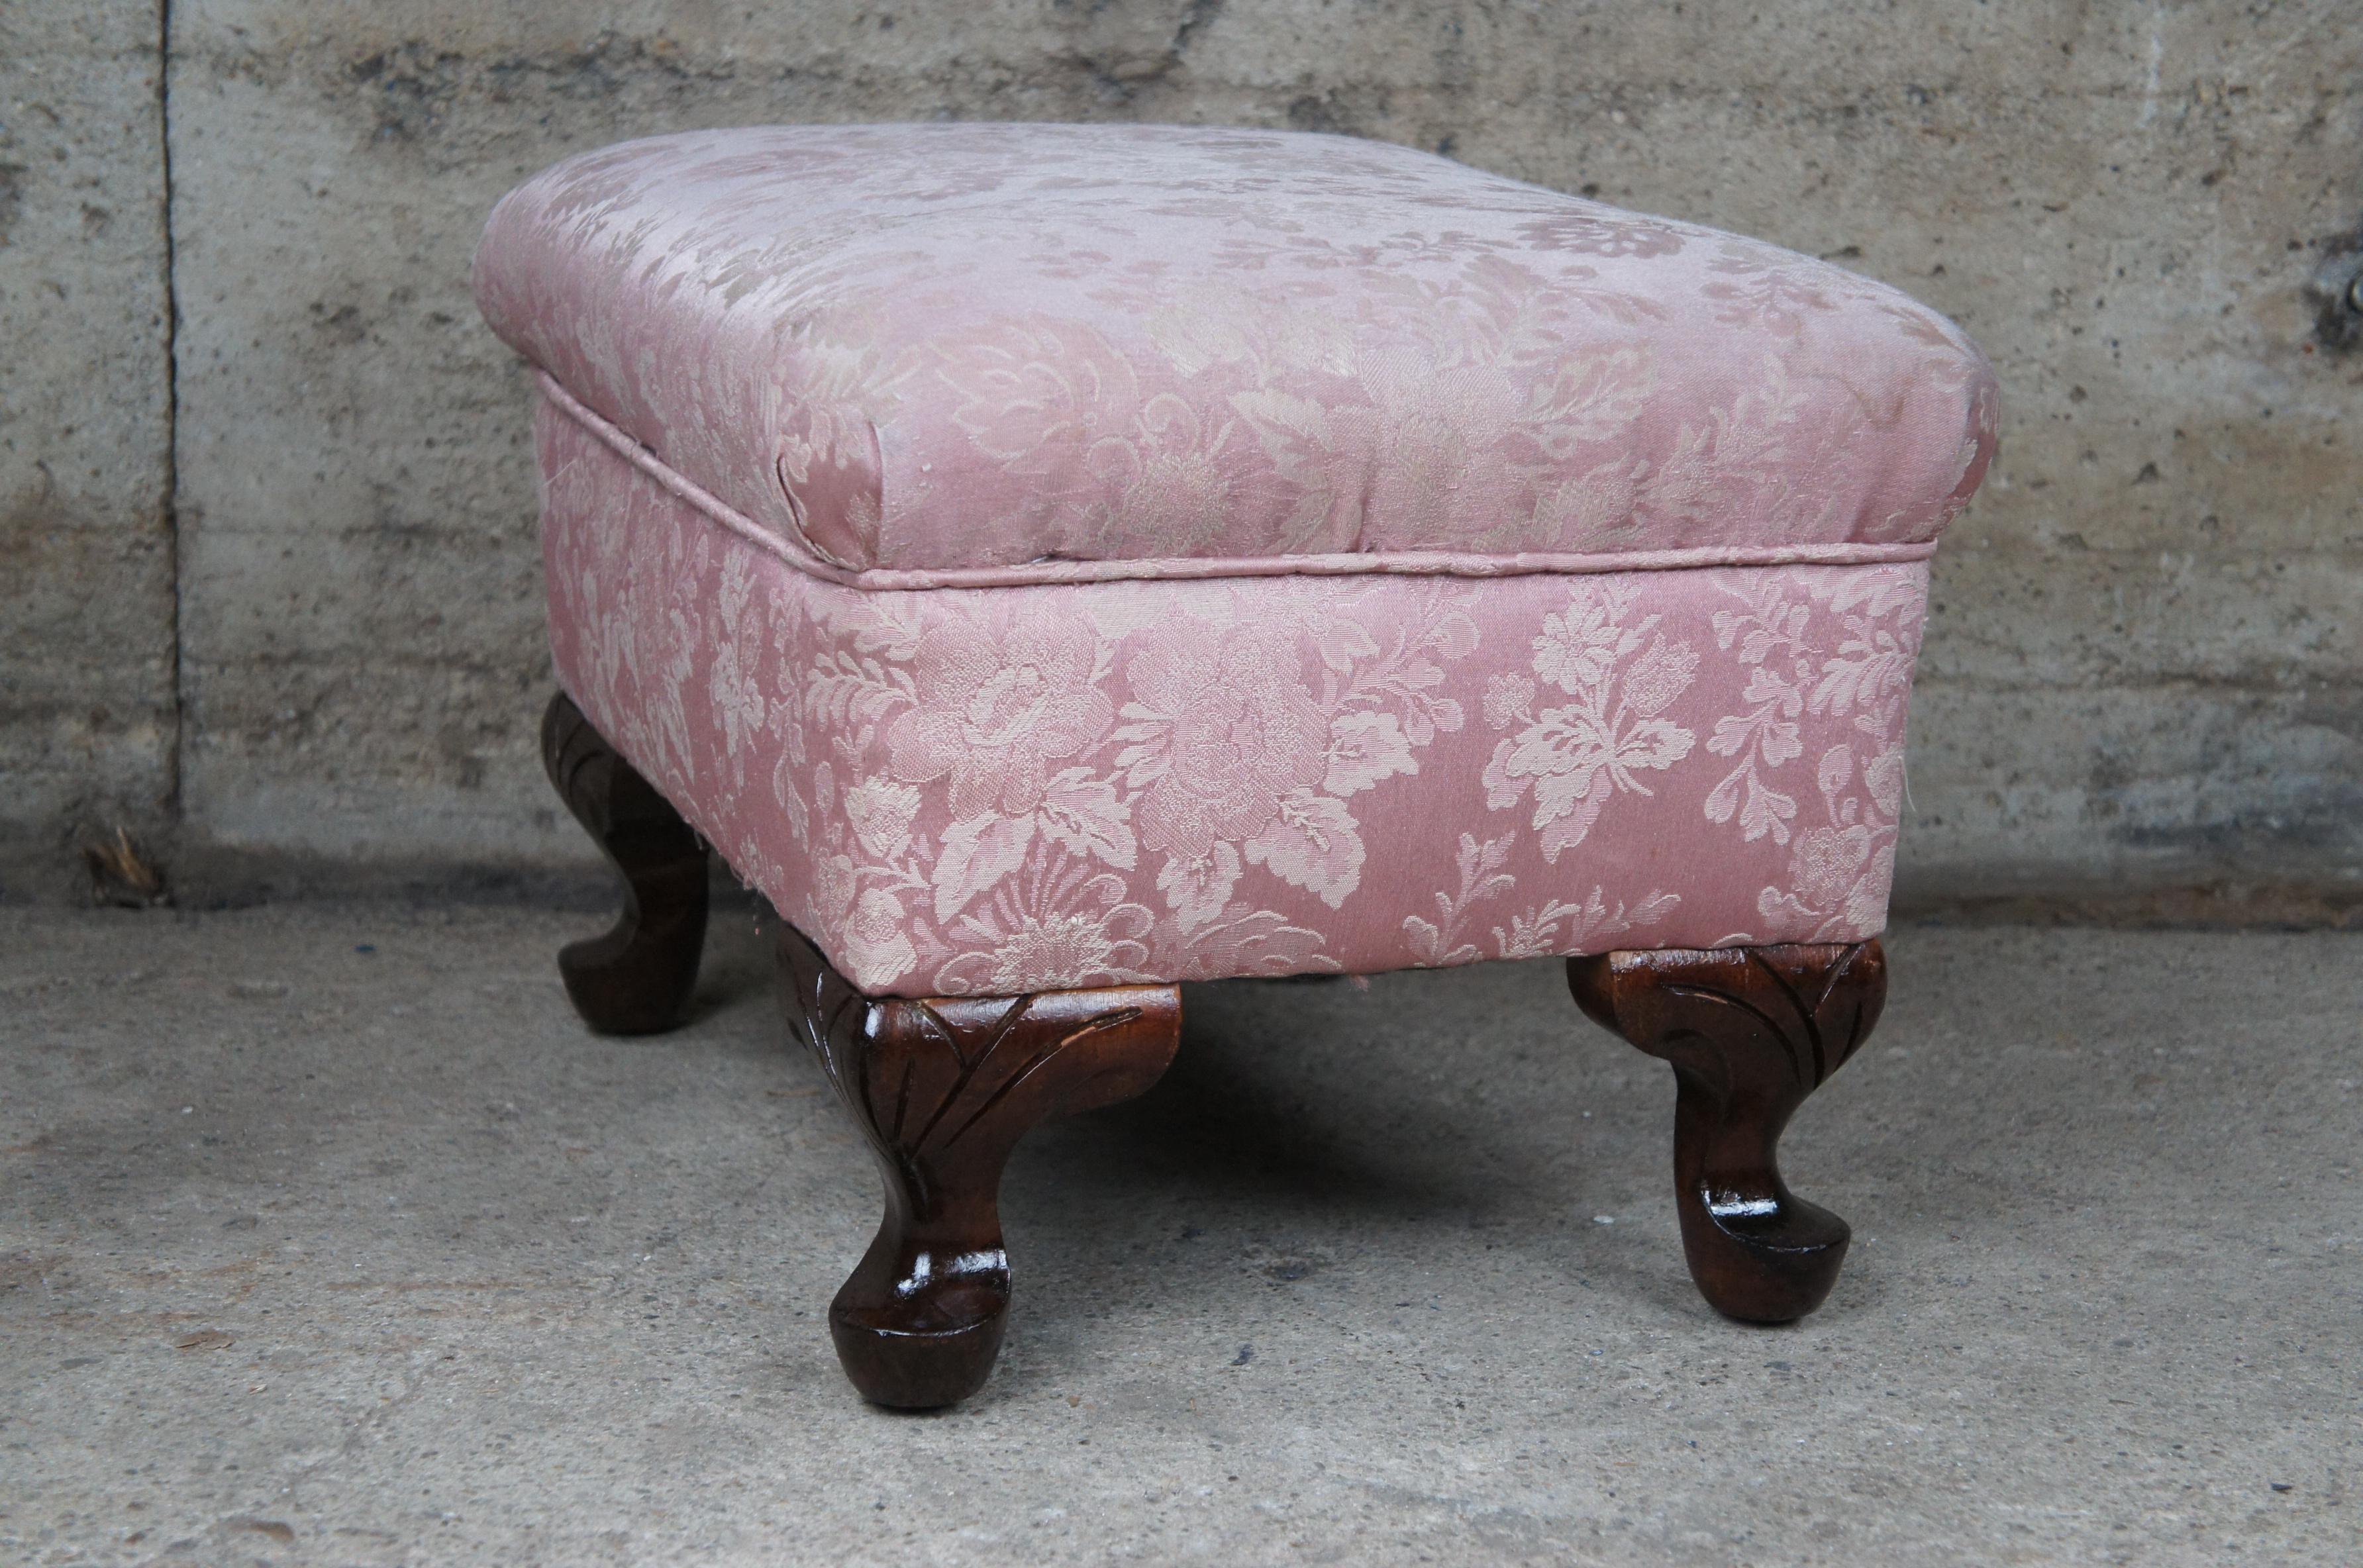 Vintage Queen Anne Floral Upholstered Walnut Ottoman Foot Stool Vanity Pouf Pink For Sale 3